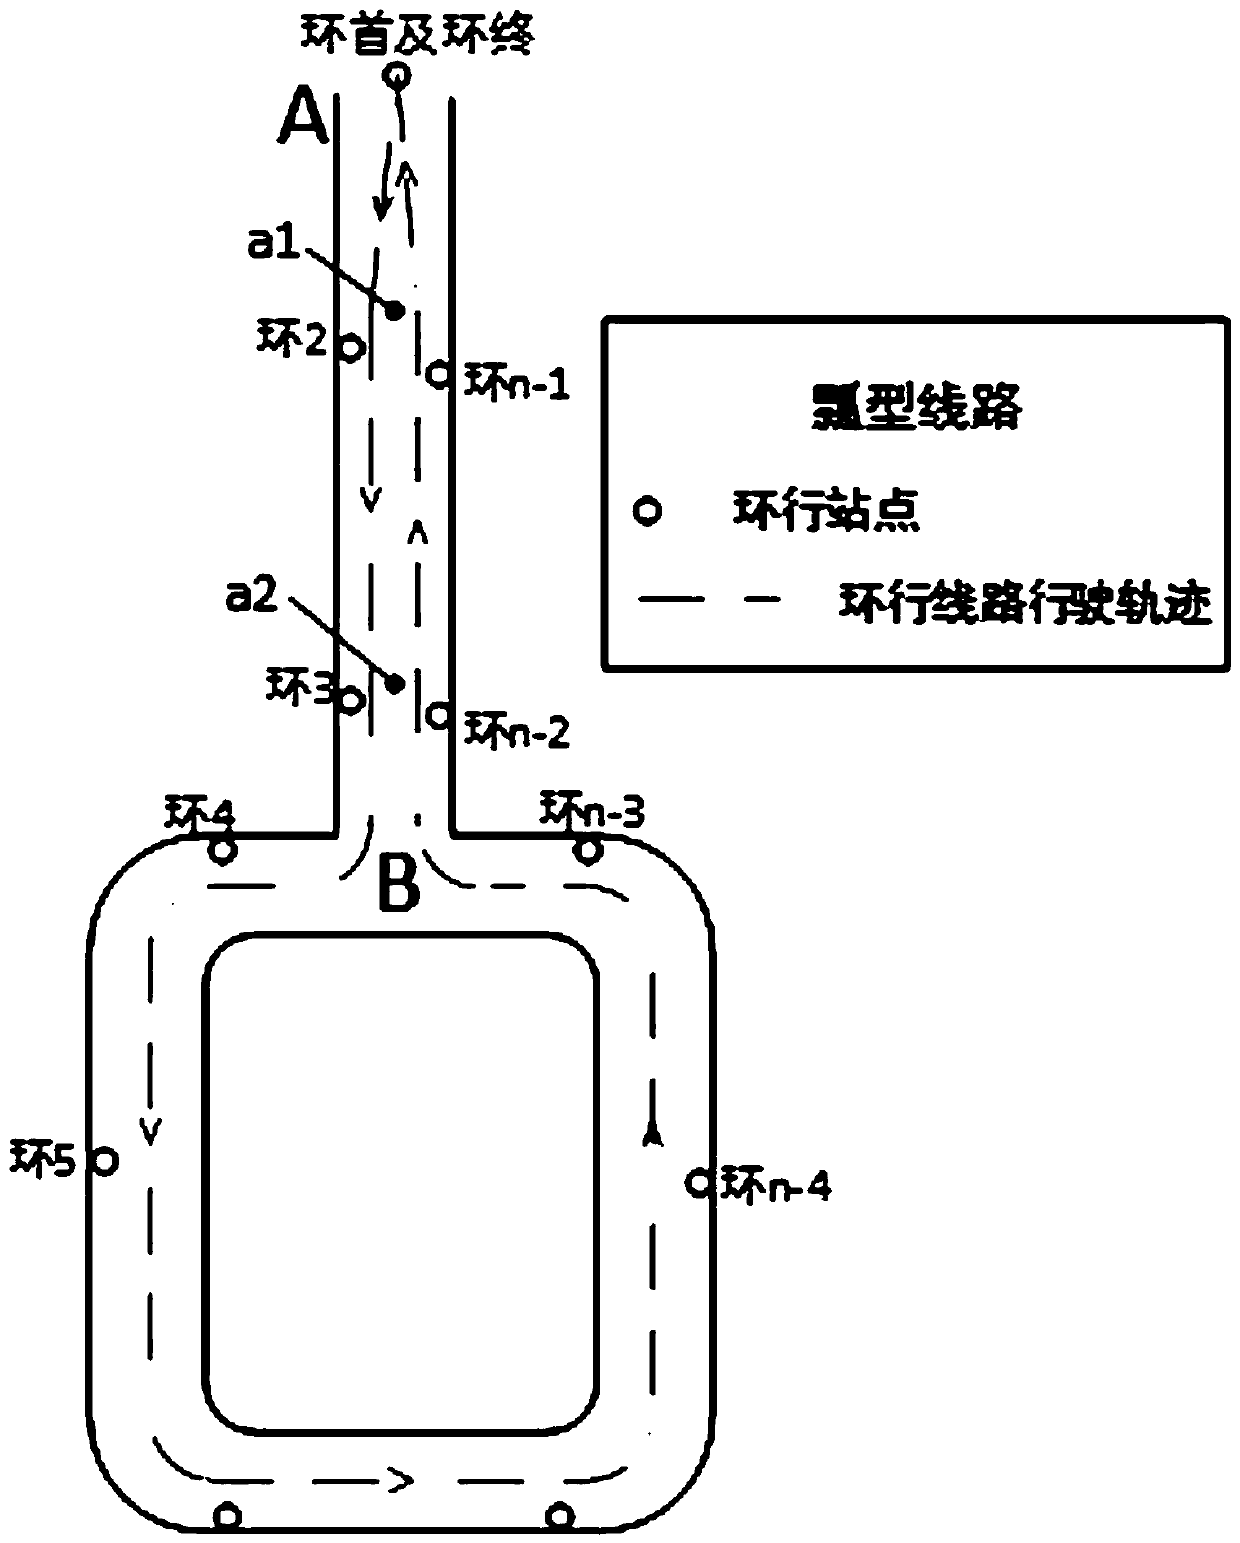 Automatic station detection method of public transport vehicle in line operation progress